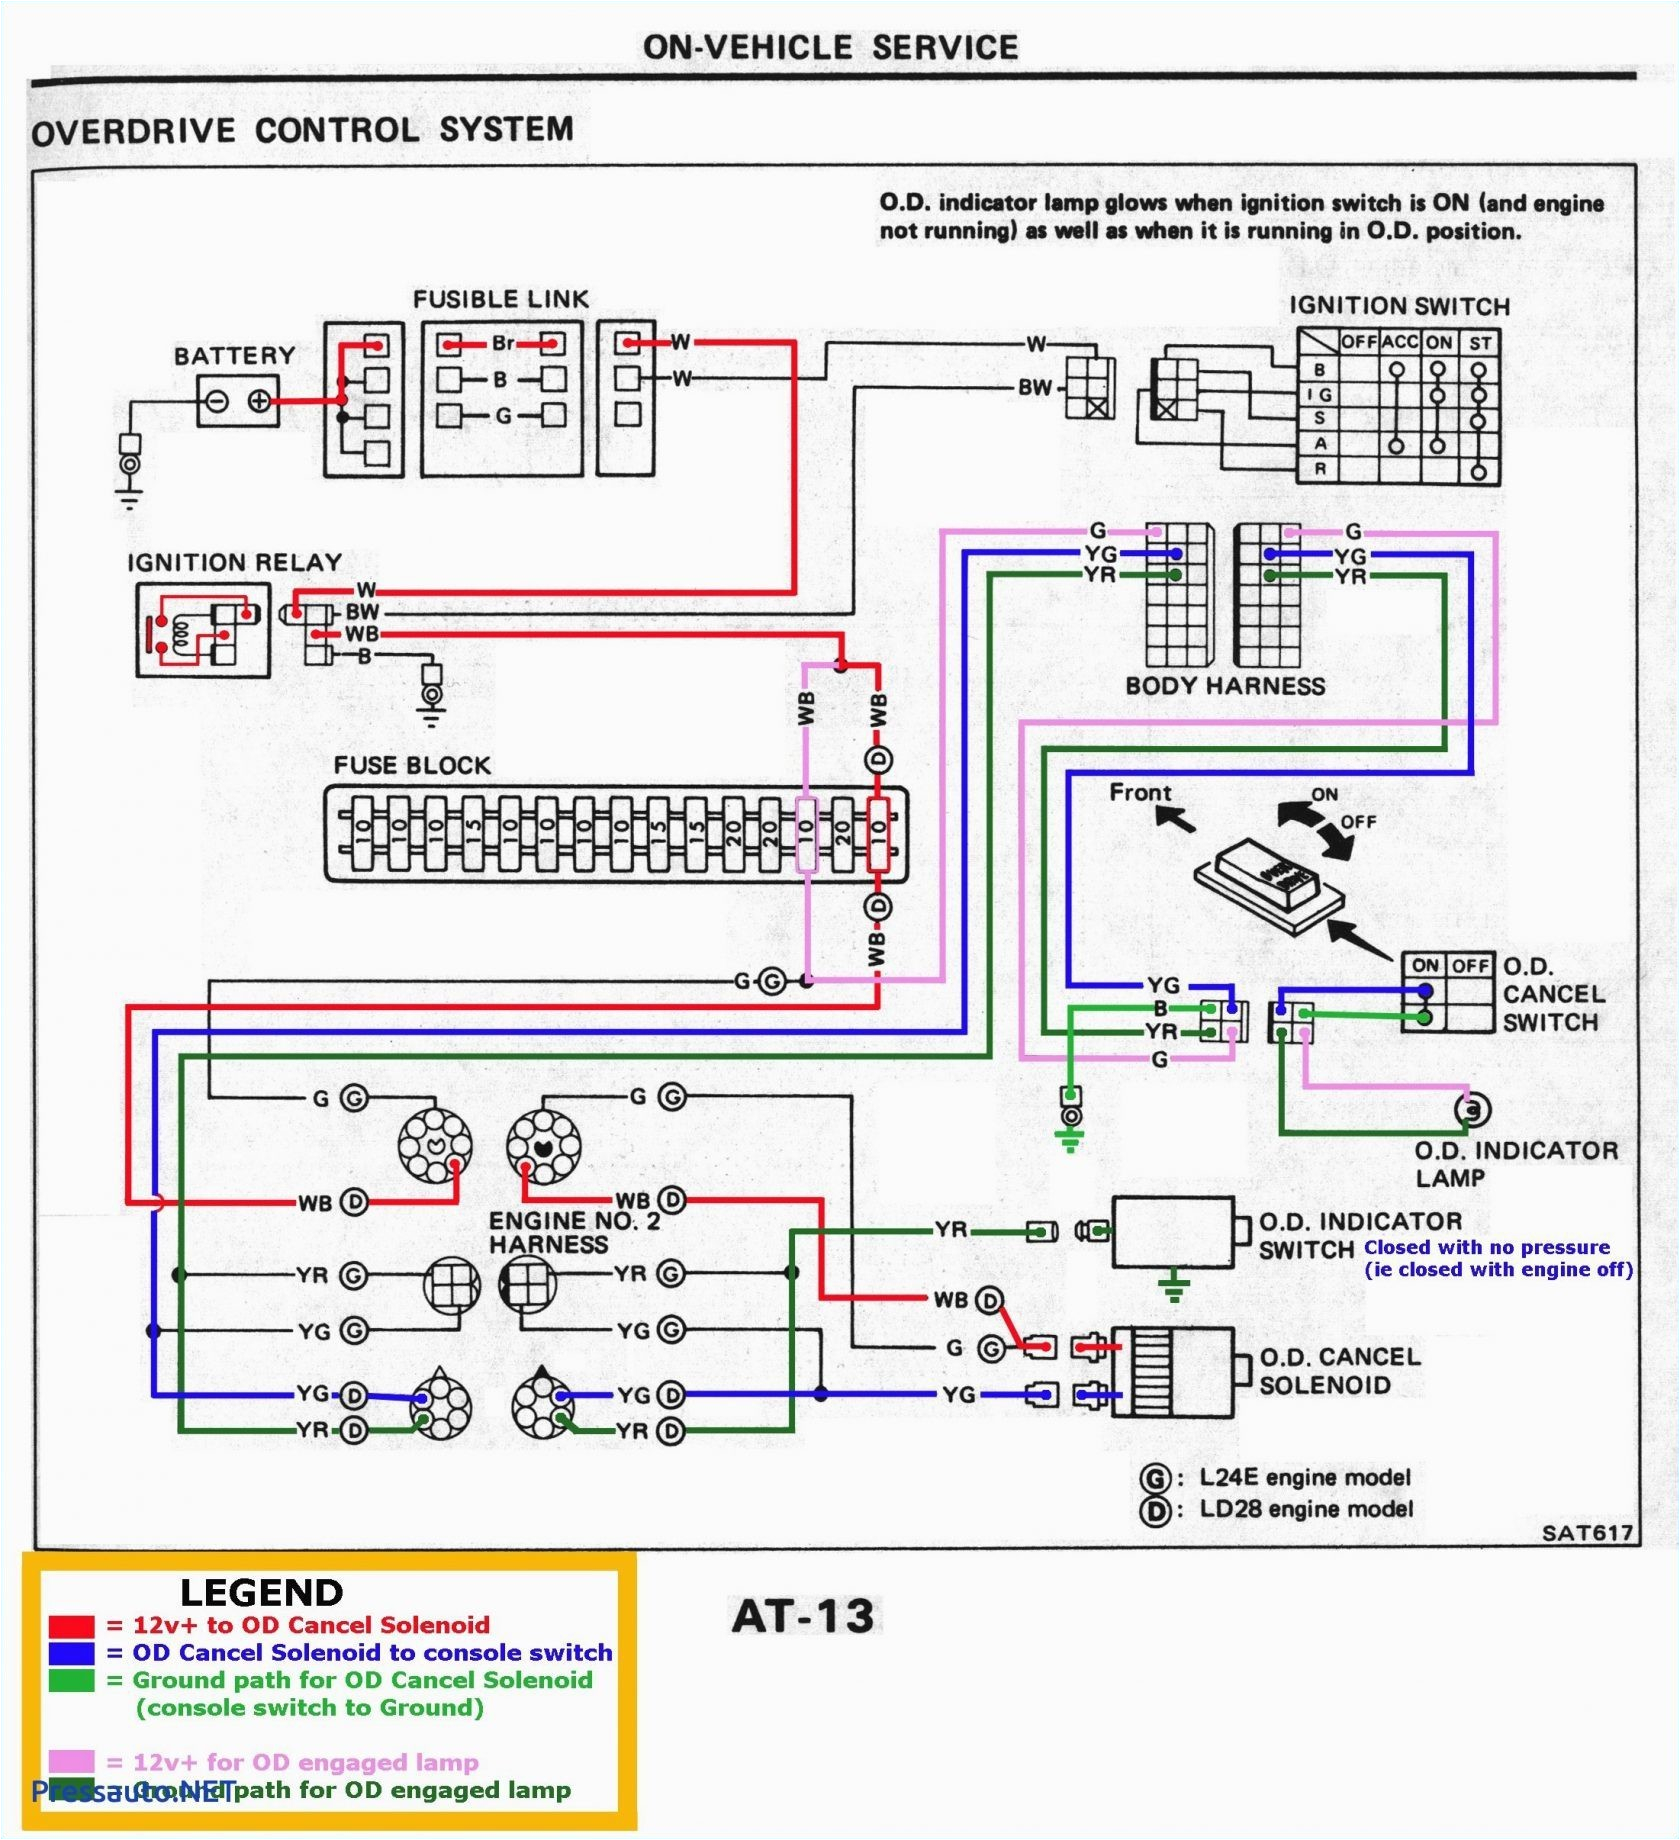 Wiring Diagram for Door Entry System Wiring Diagram for Automatic Locks Wiring Diagram Datasource